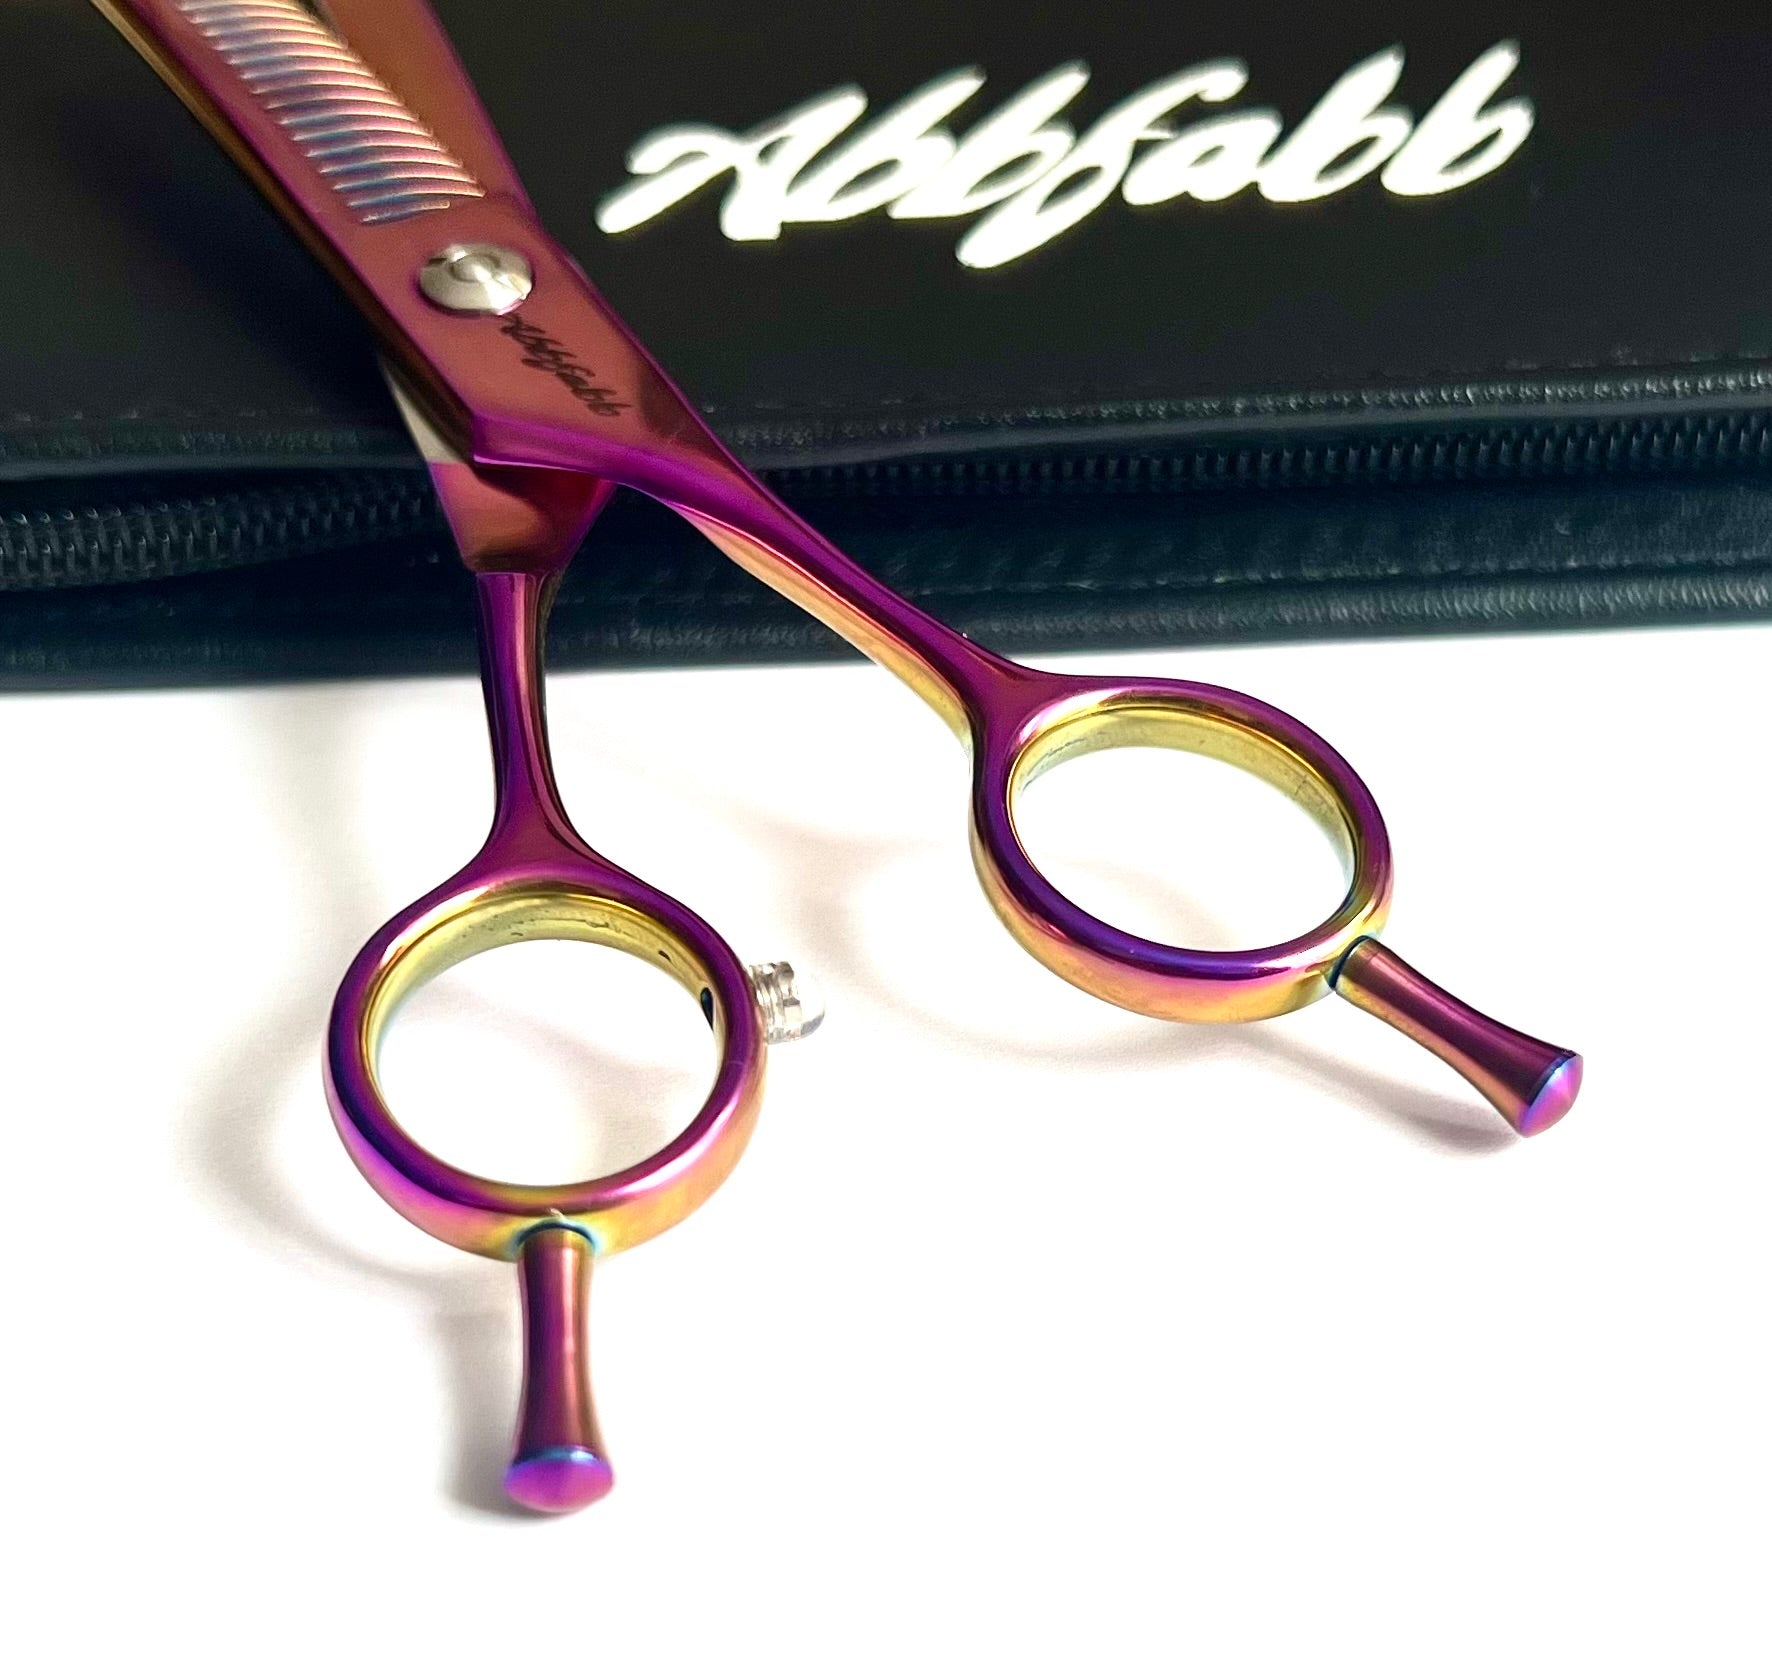 Curved dog grooming chunkers-curved testurising dog grooming scissors-dog grooming scissors-chunkers-Abbfabb